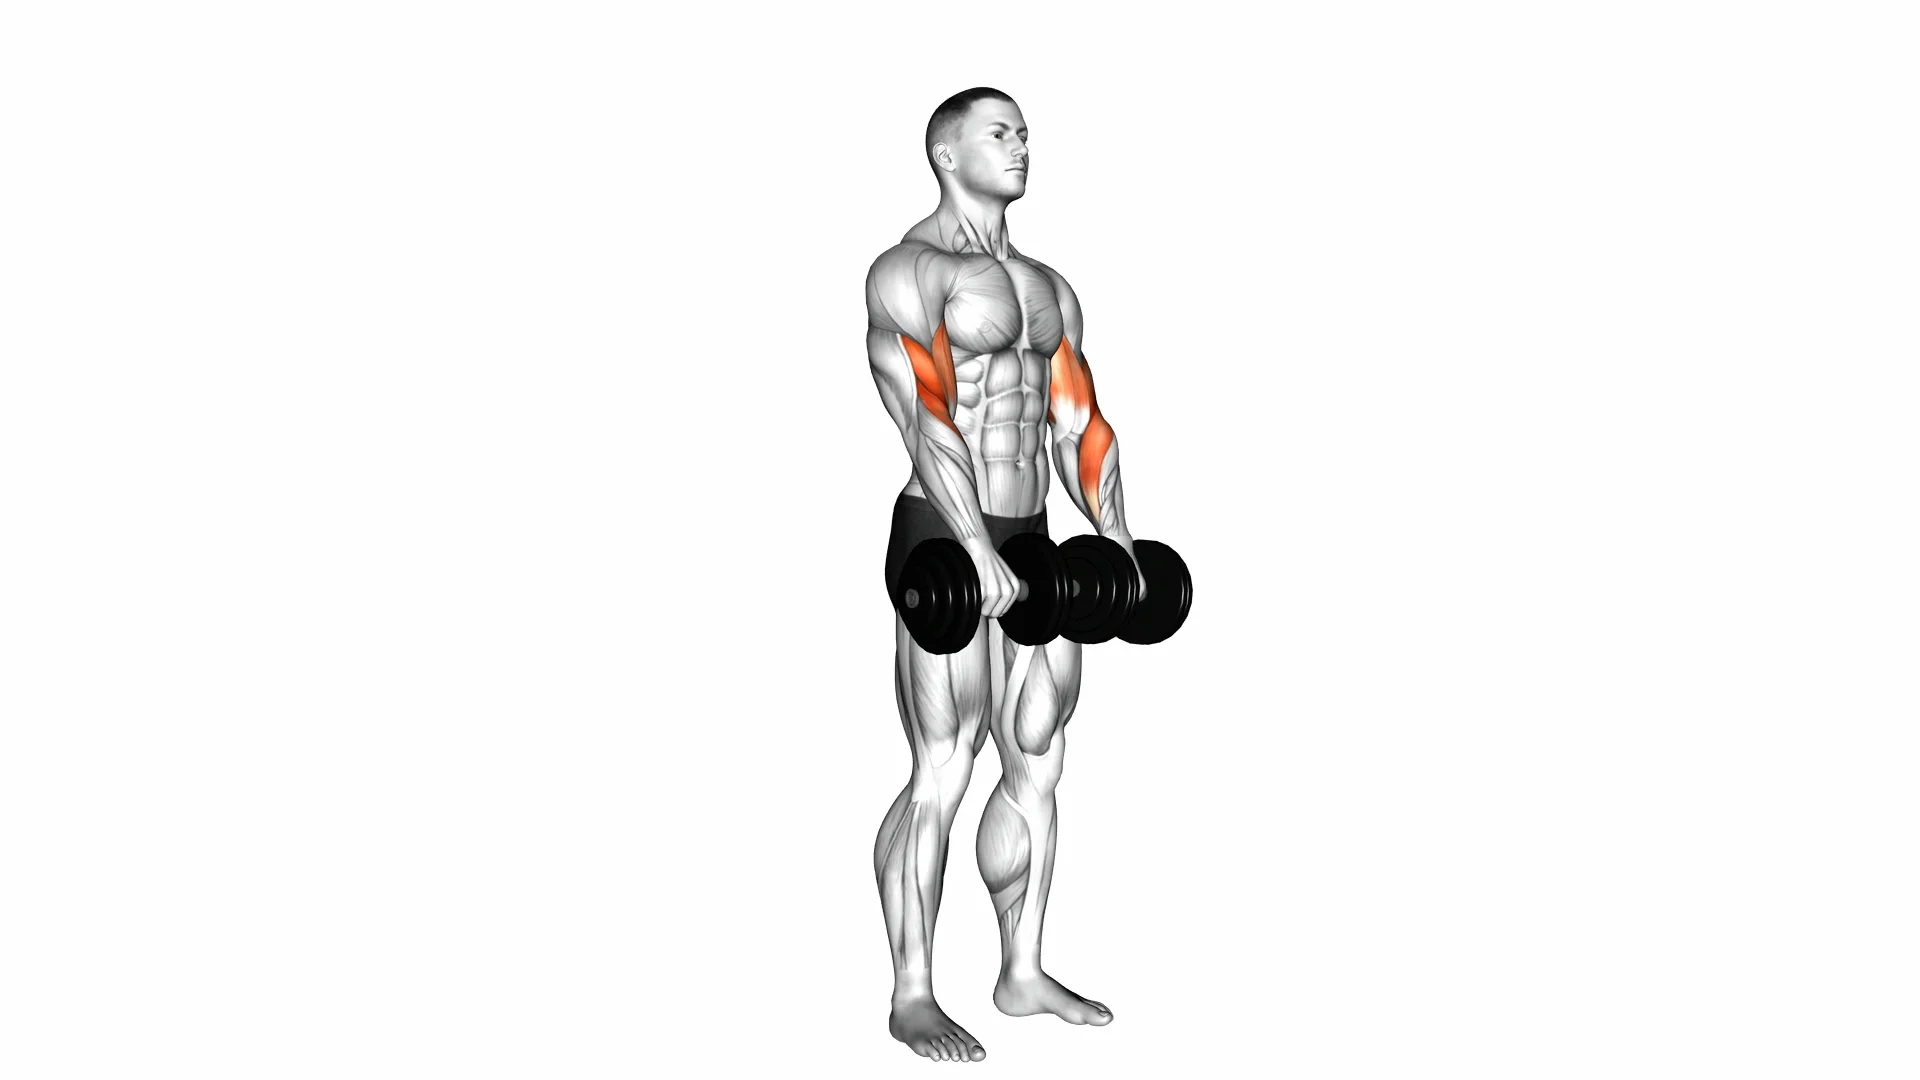 Dumbbell-Revers-grip-Biceps-Curl_Forearms on Vimeo